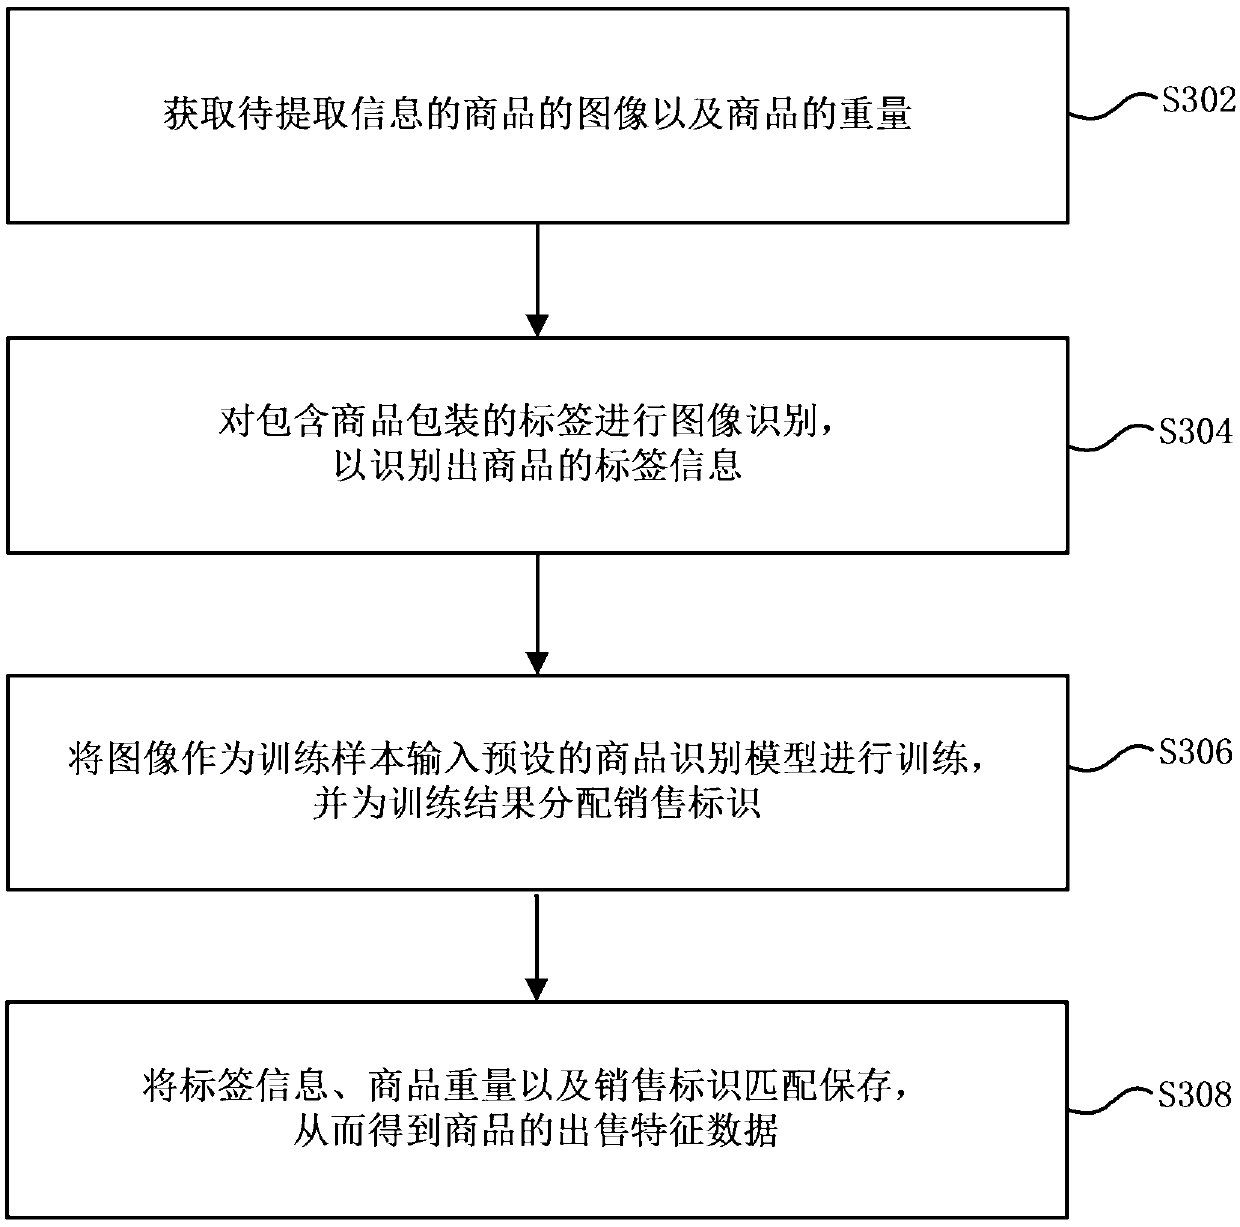 Commodity information extraction method and device, and automatic vending system